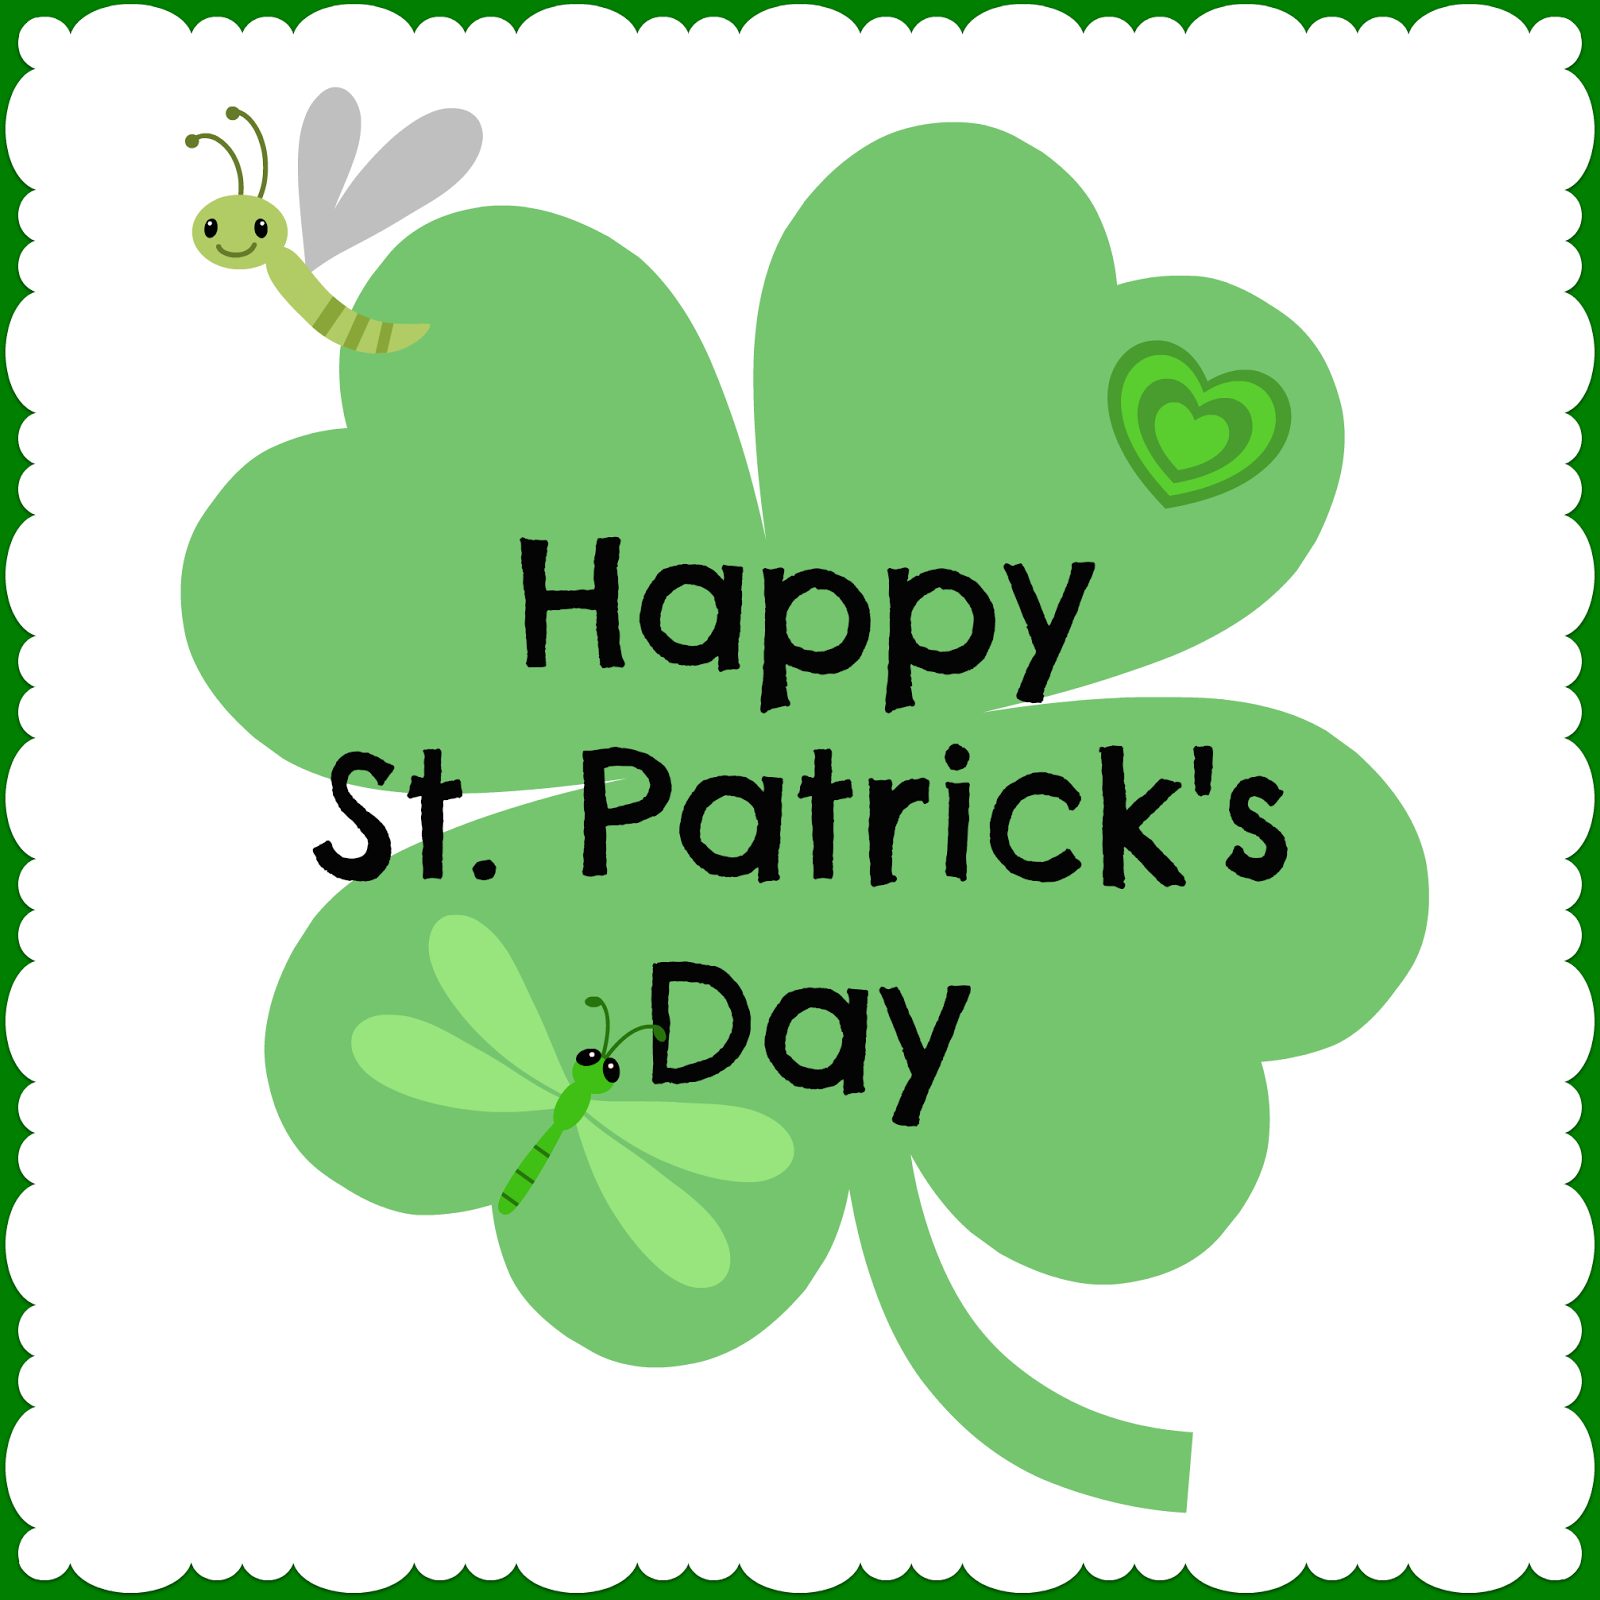 green shamrock with text wishing you a Happy St. Patrick's Day with digital cute bugs by BeckyCharms